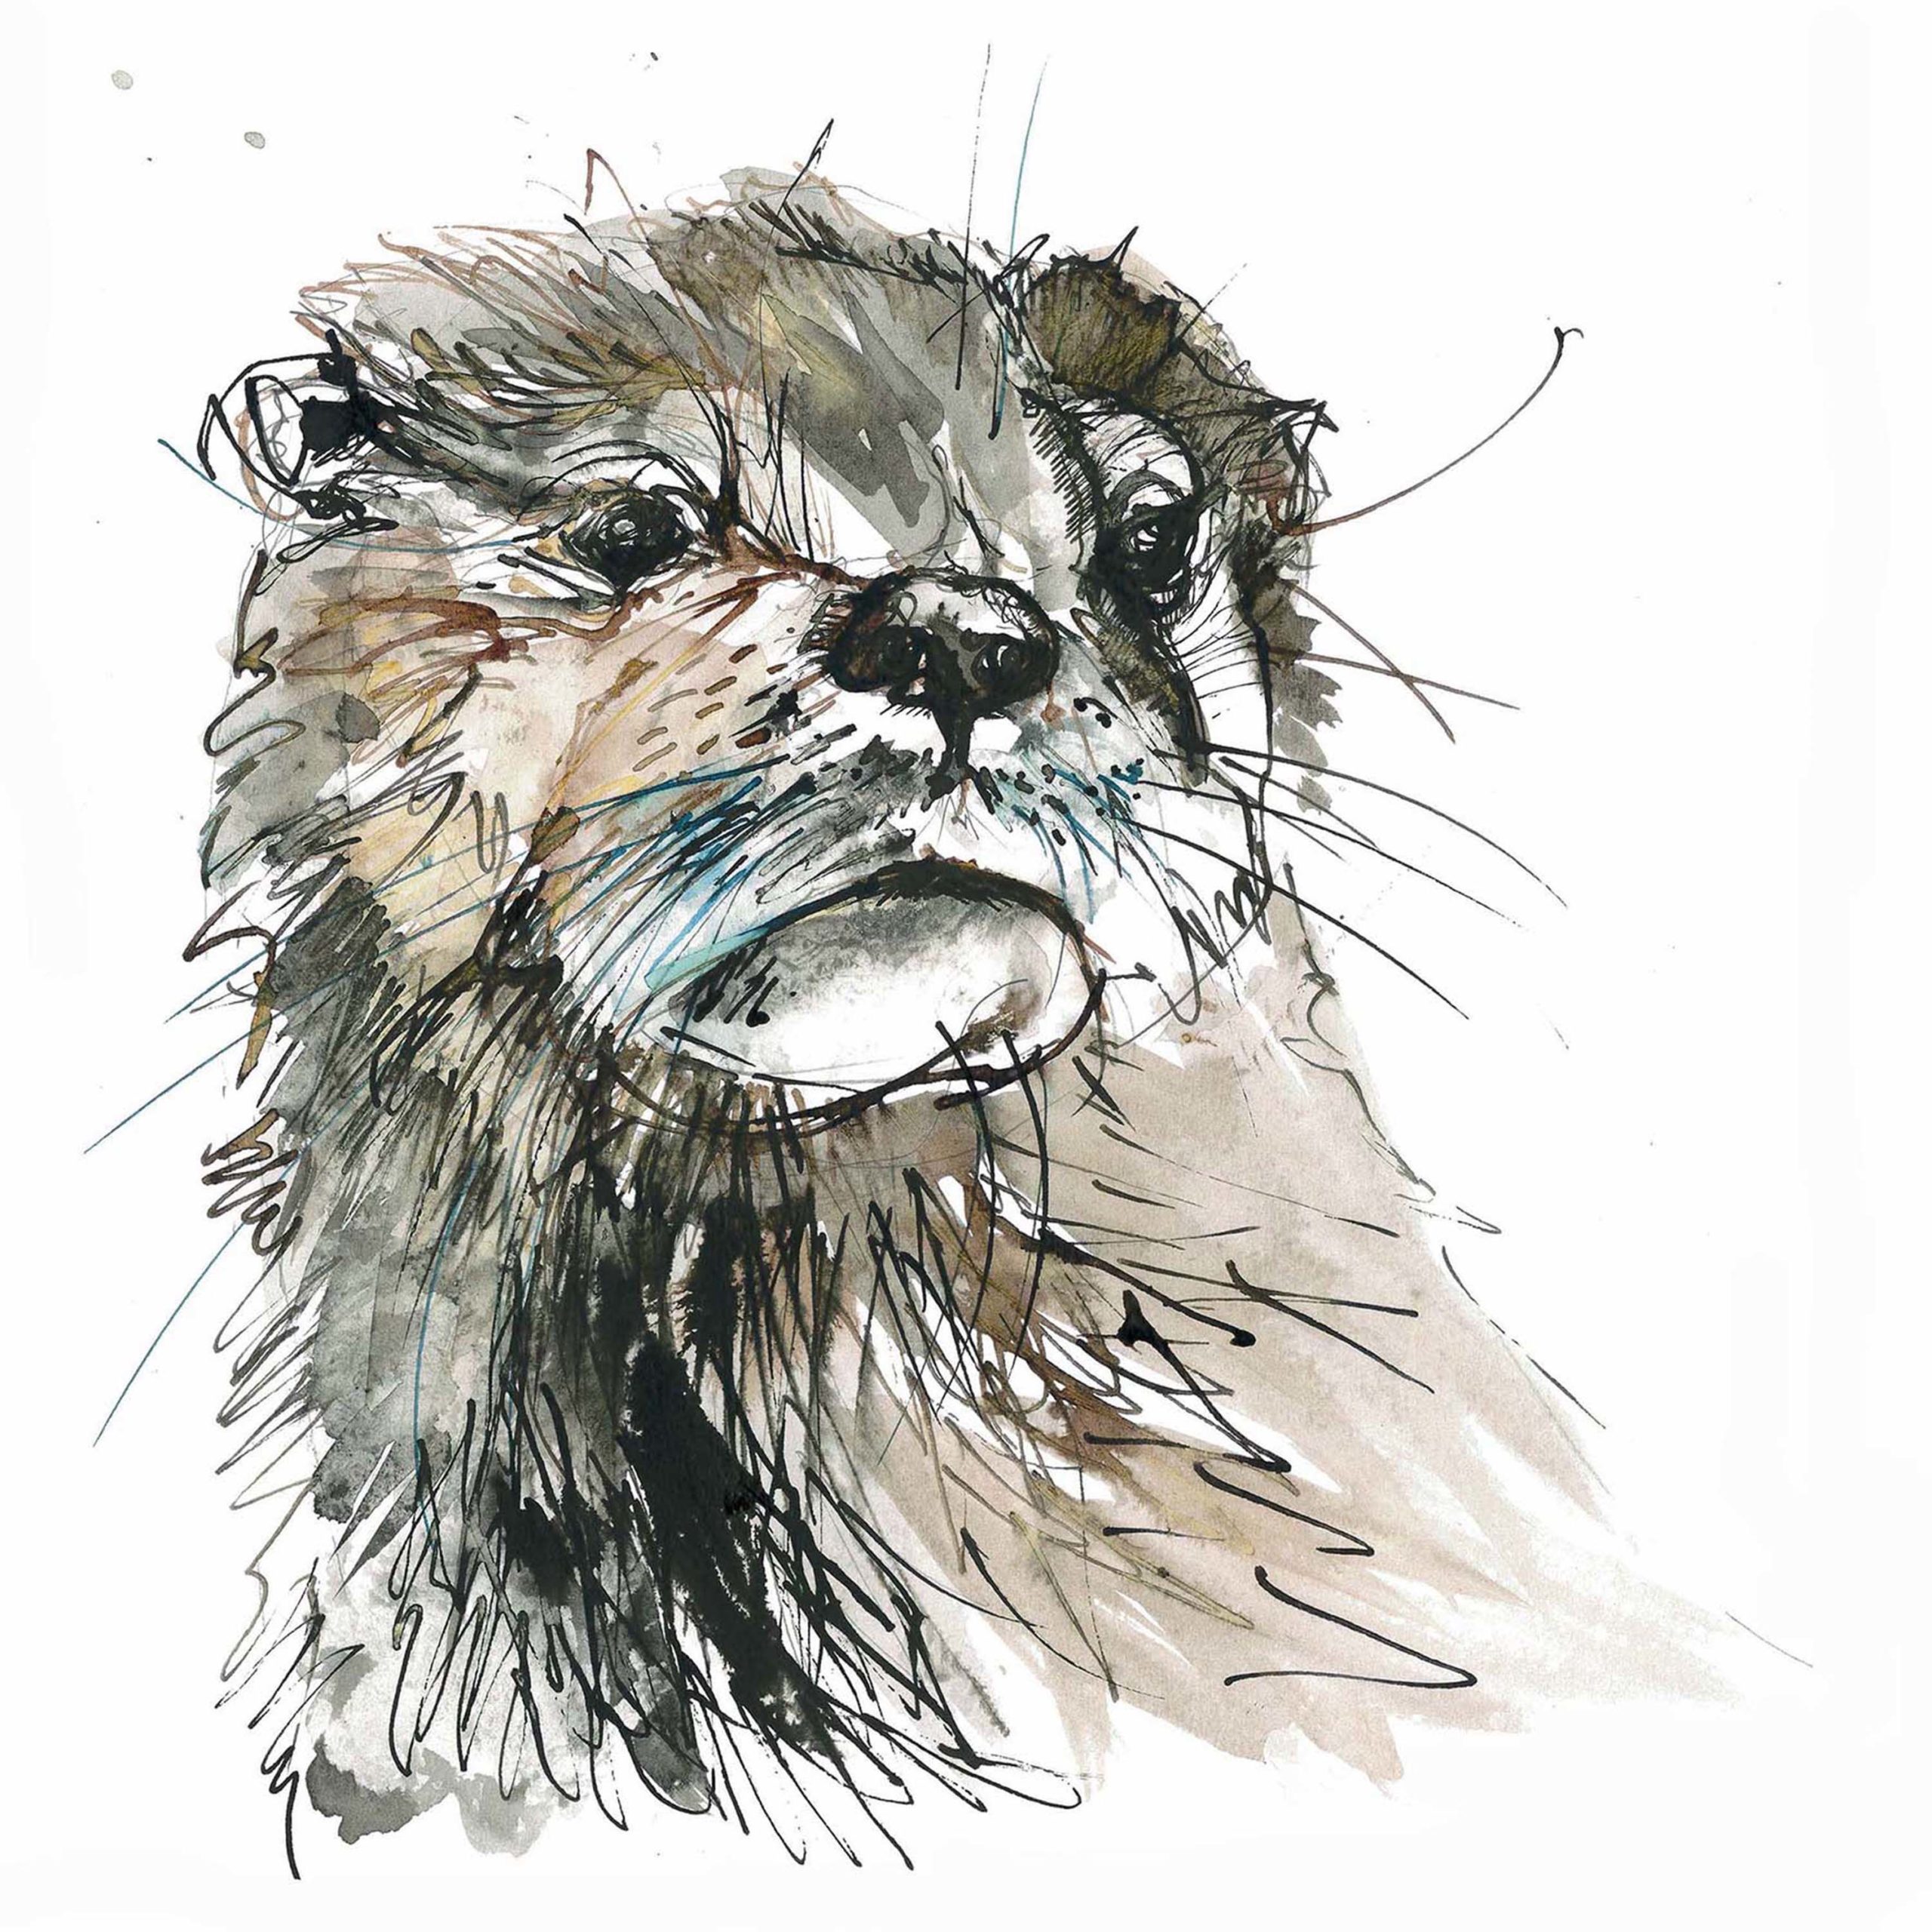  Otter pen and ink drawing - gilcl e print - ClearCompany Shop